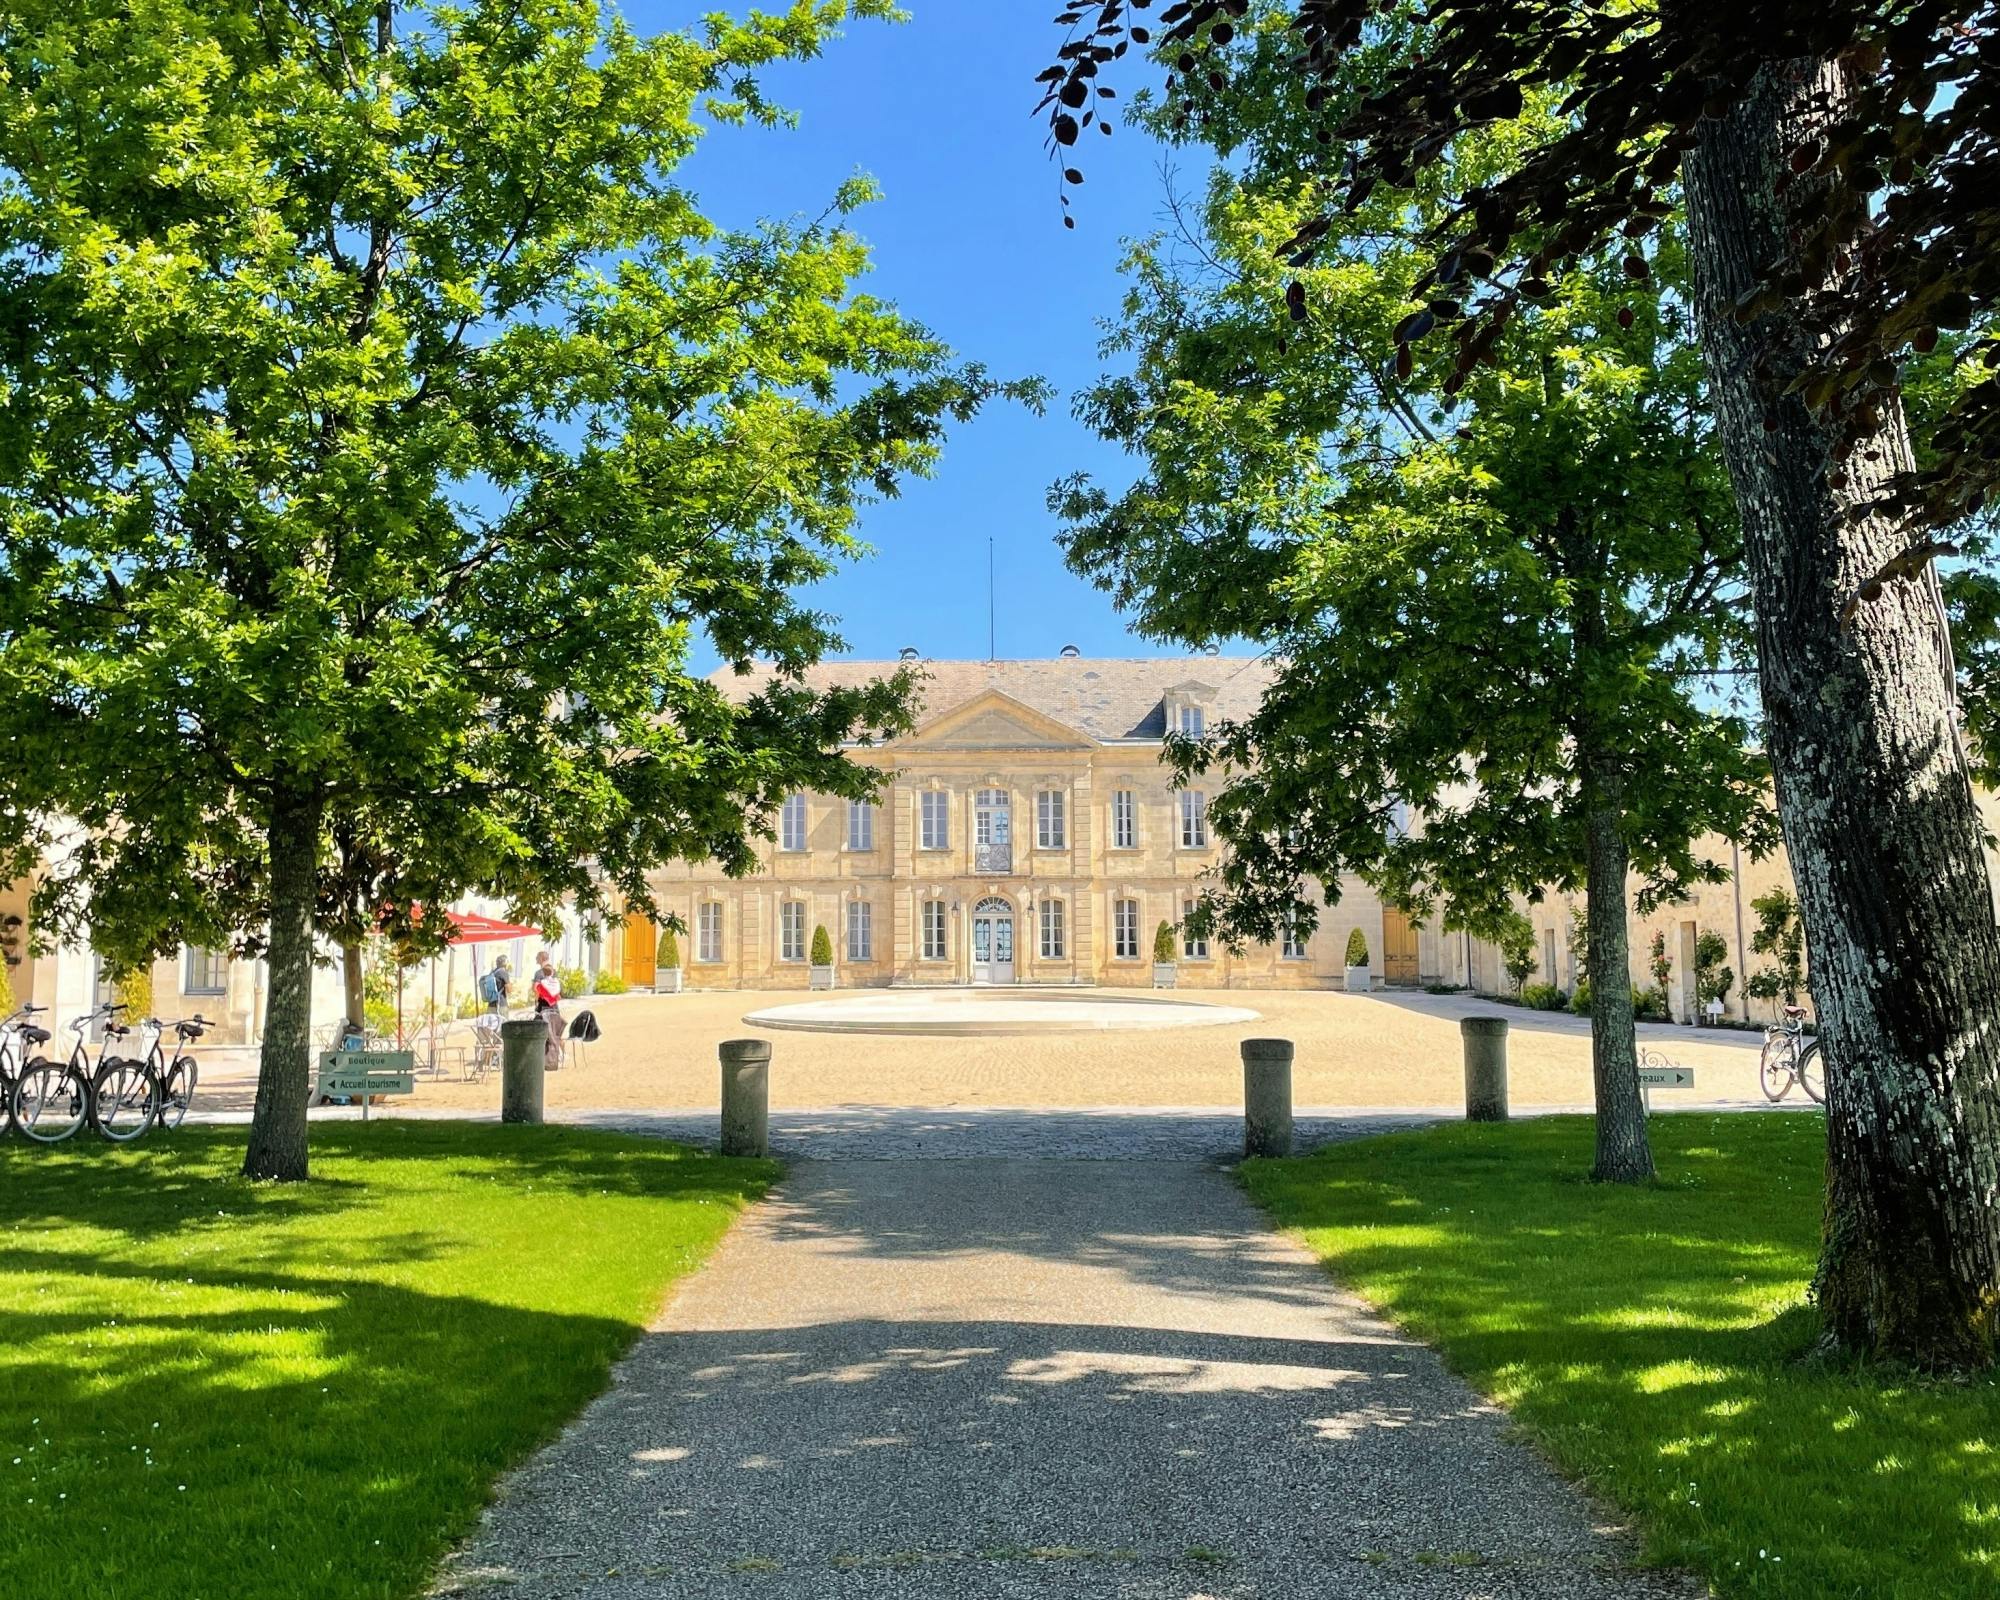 Morning wine tour of the Medoc Musement